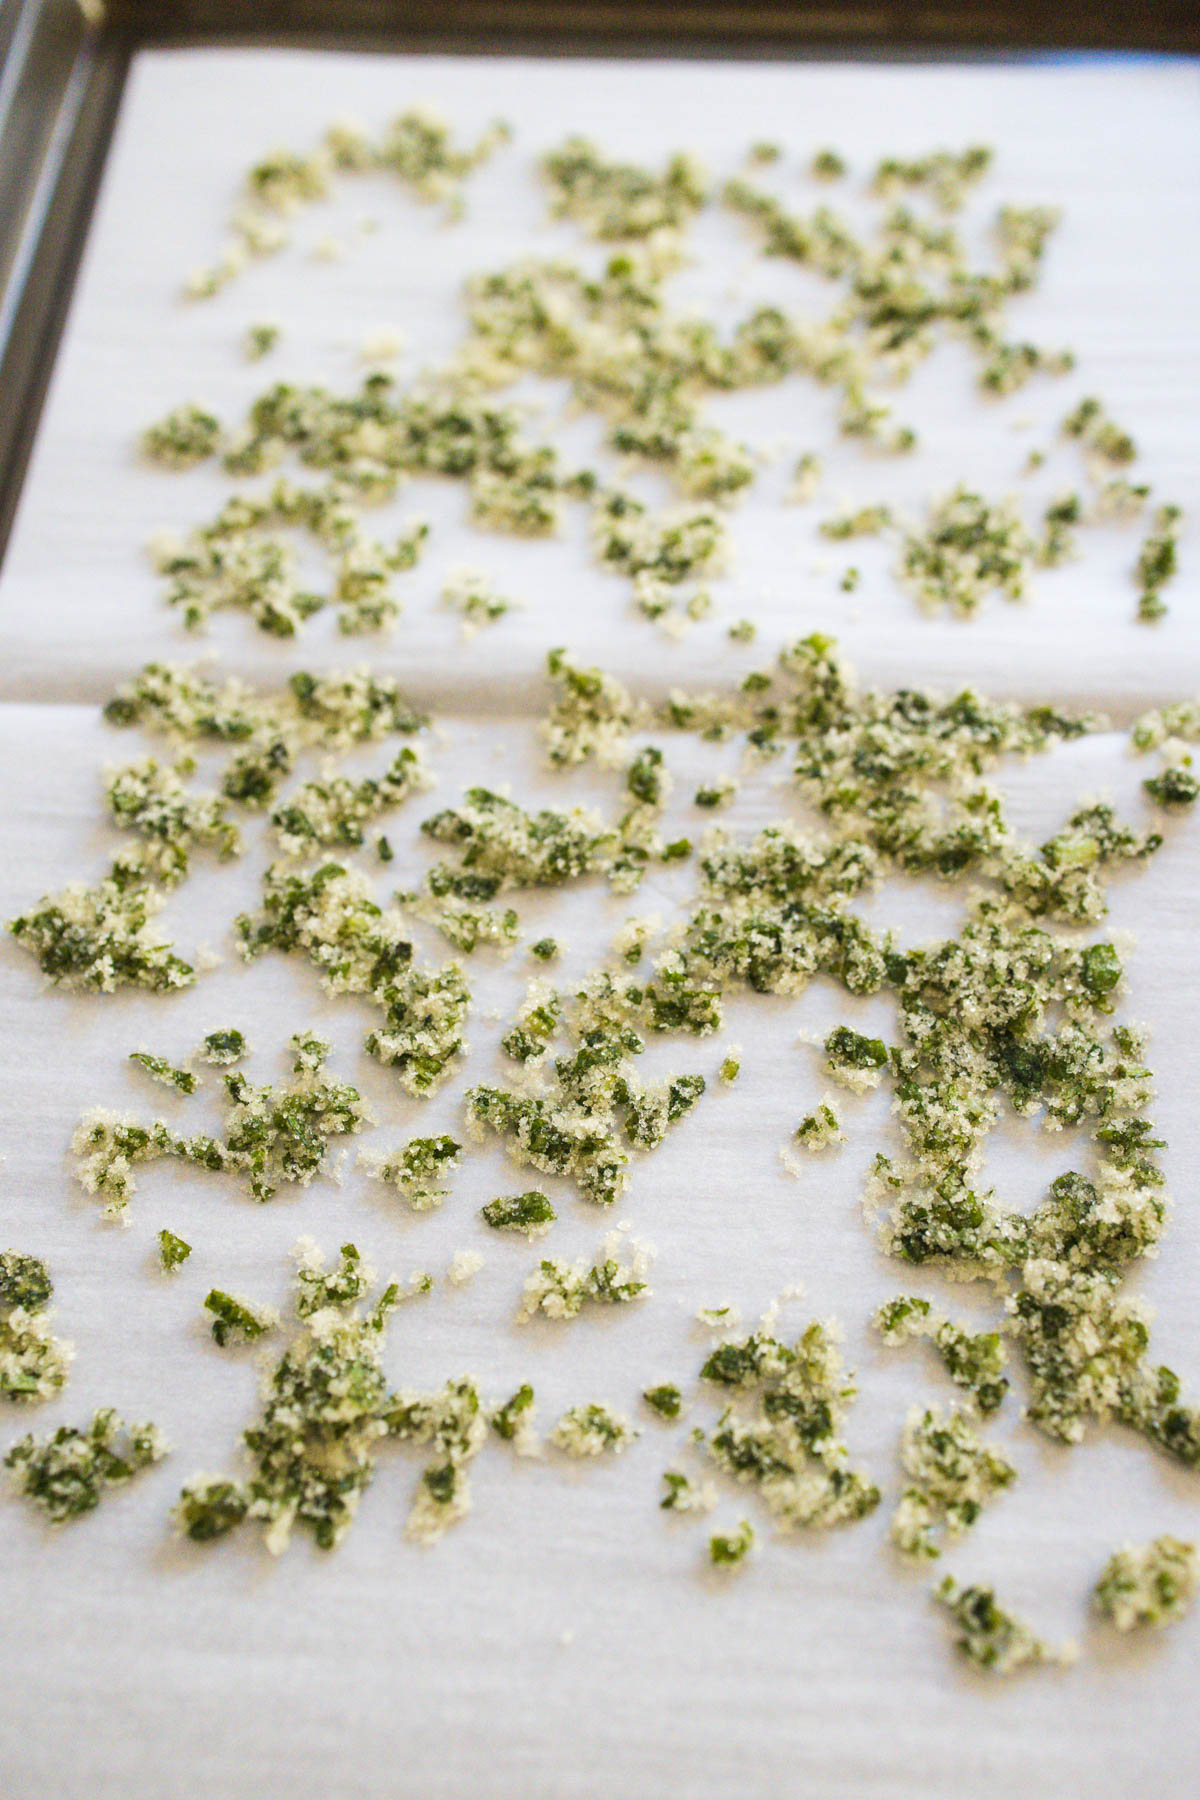 Candied basil sugar spread out on a cookie sheet to dry out.